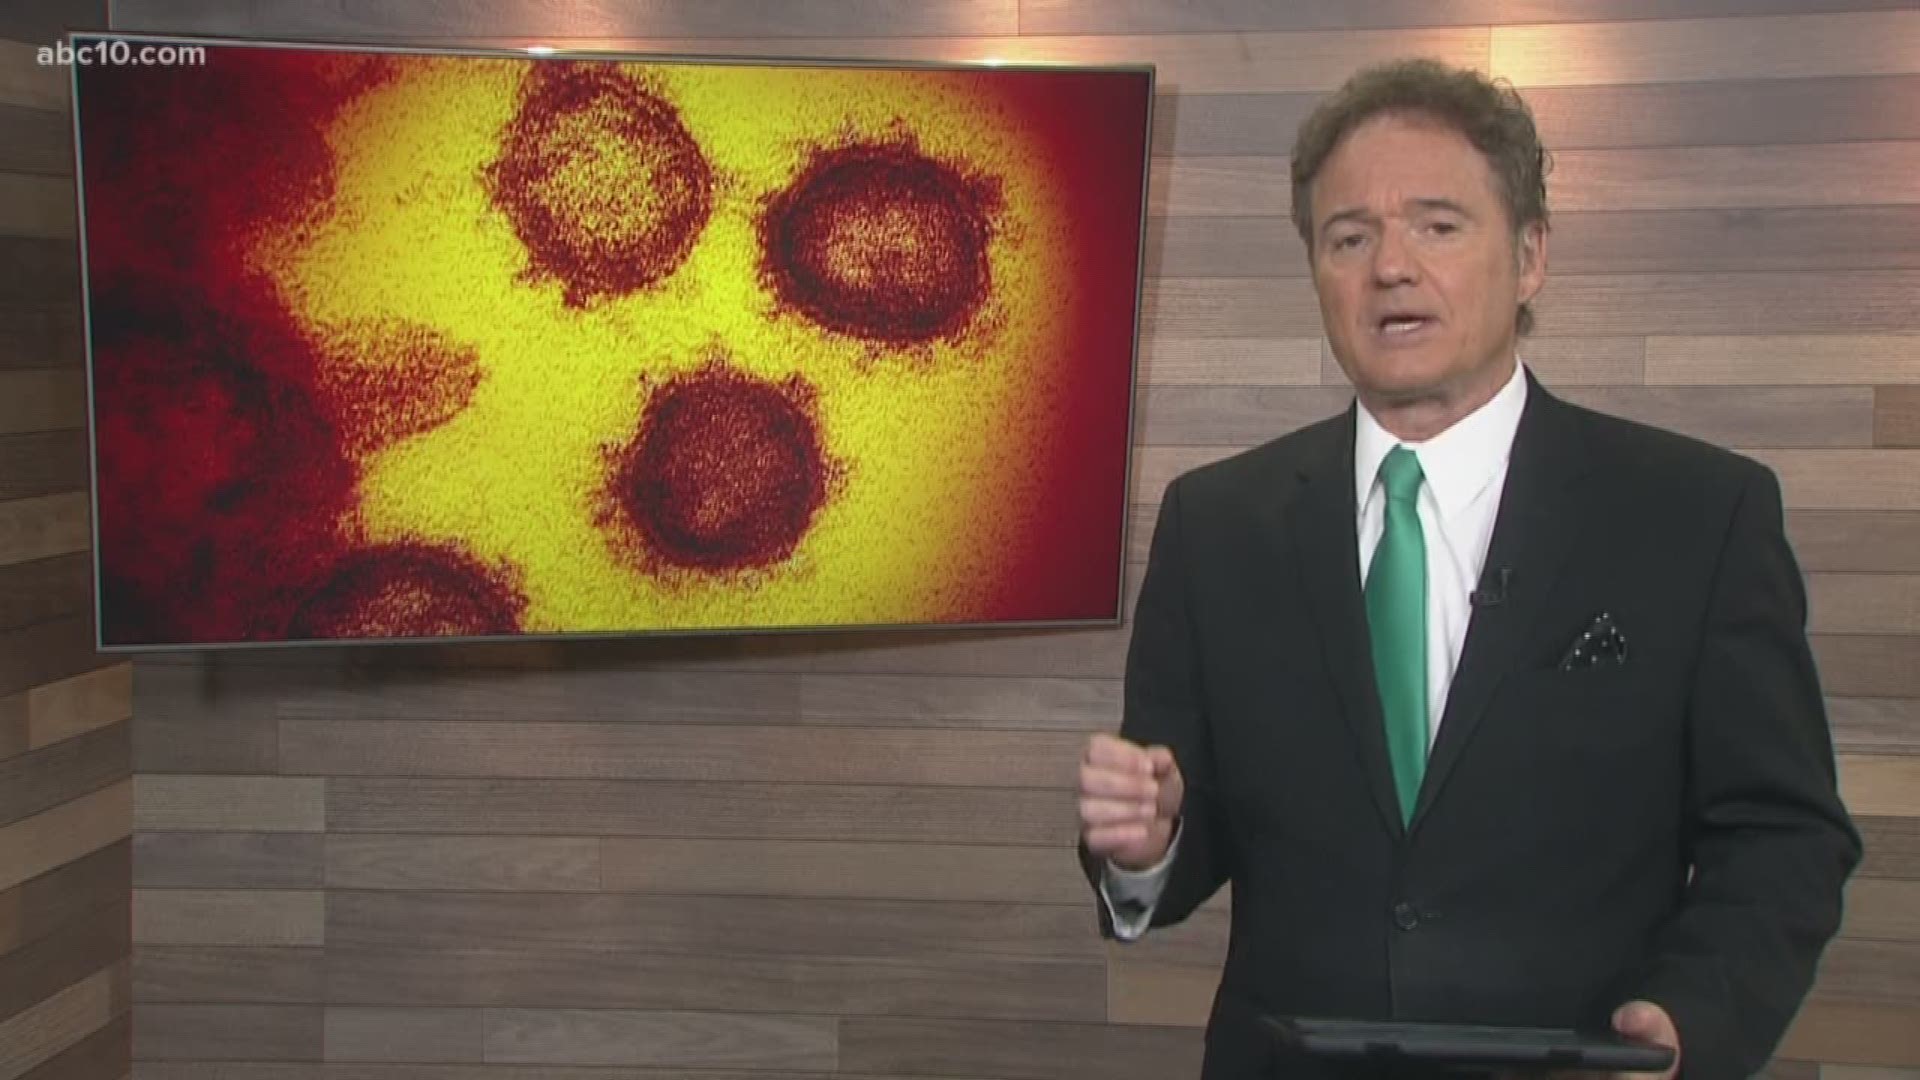 You probably have a strong opinion one way or the other about media coverage of the coronavirus. In today's Blender, Walt explains why things are the way they are.